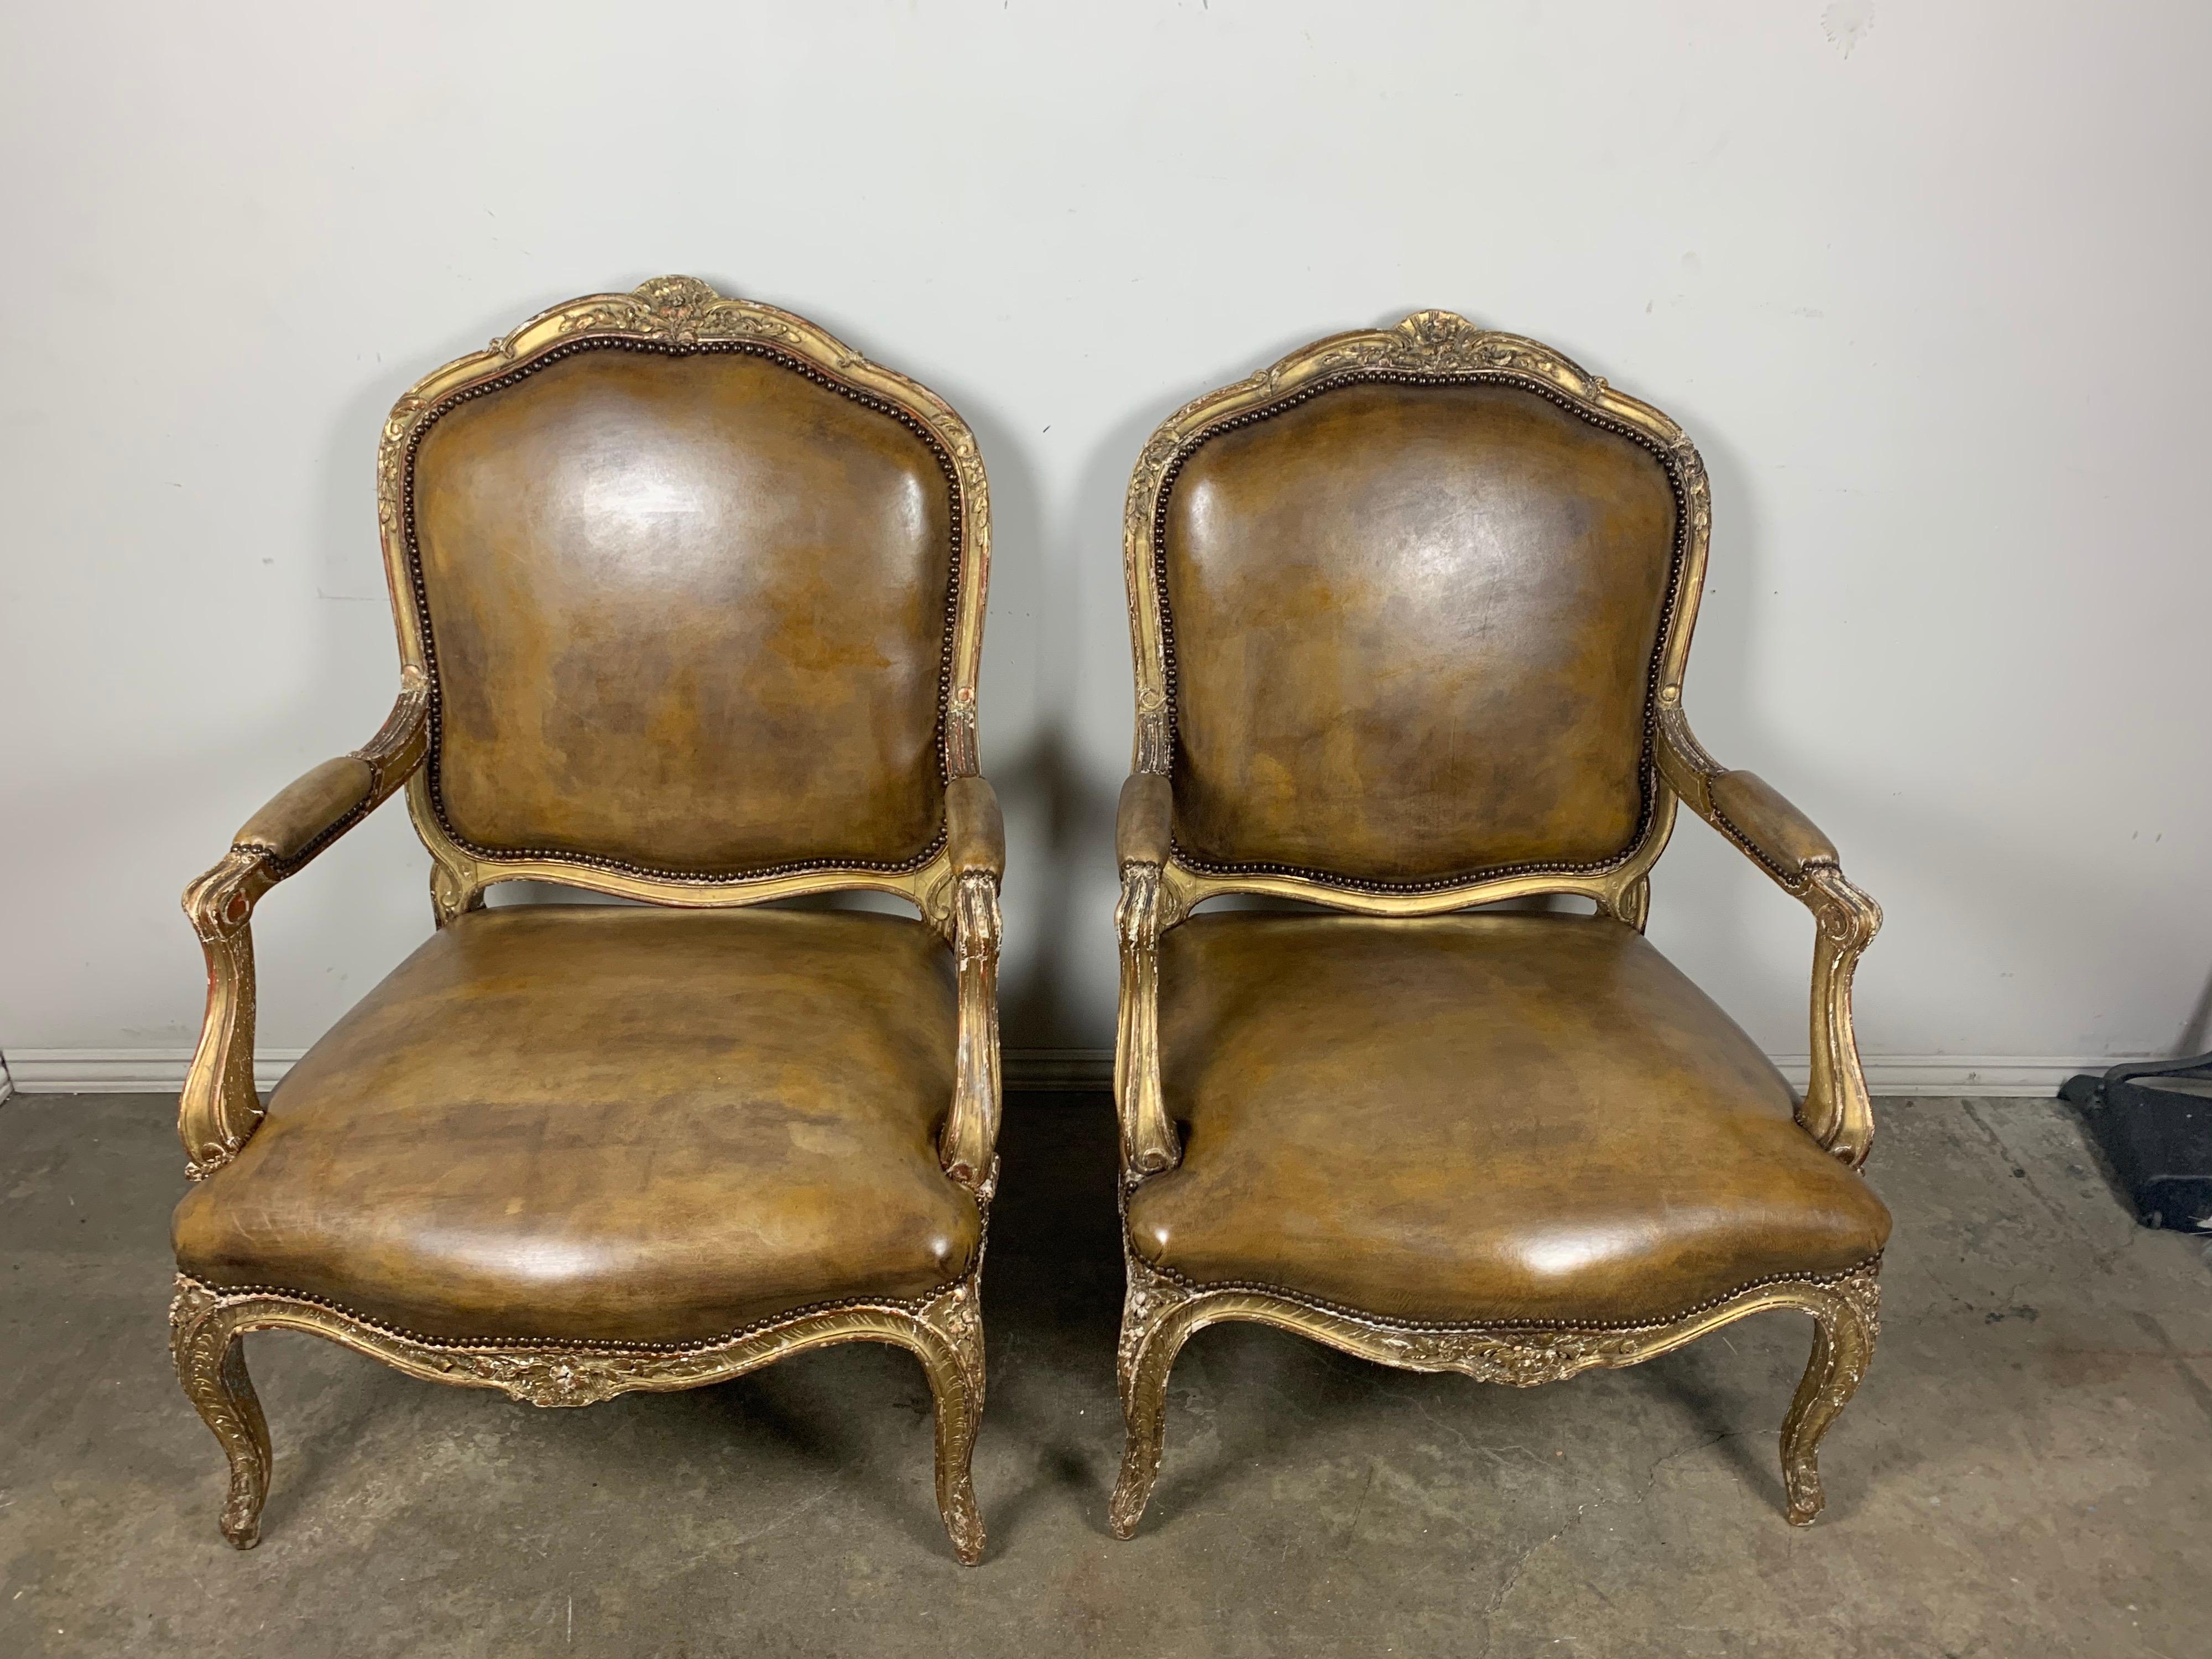 Pair of early 20th century French giltwood armchairs that are upholstered in a tobacco colored leather with nailhead trim detail. The chairs stand on four carved cabriole legs. Small carved flowers throughout. Distressed gilt wood finish.